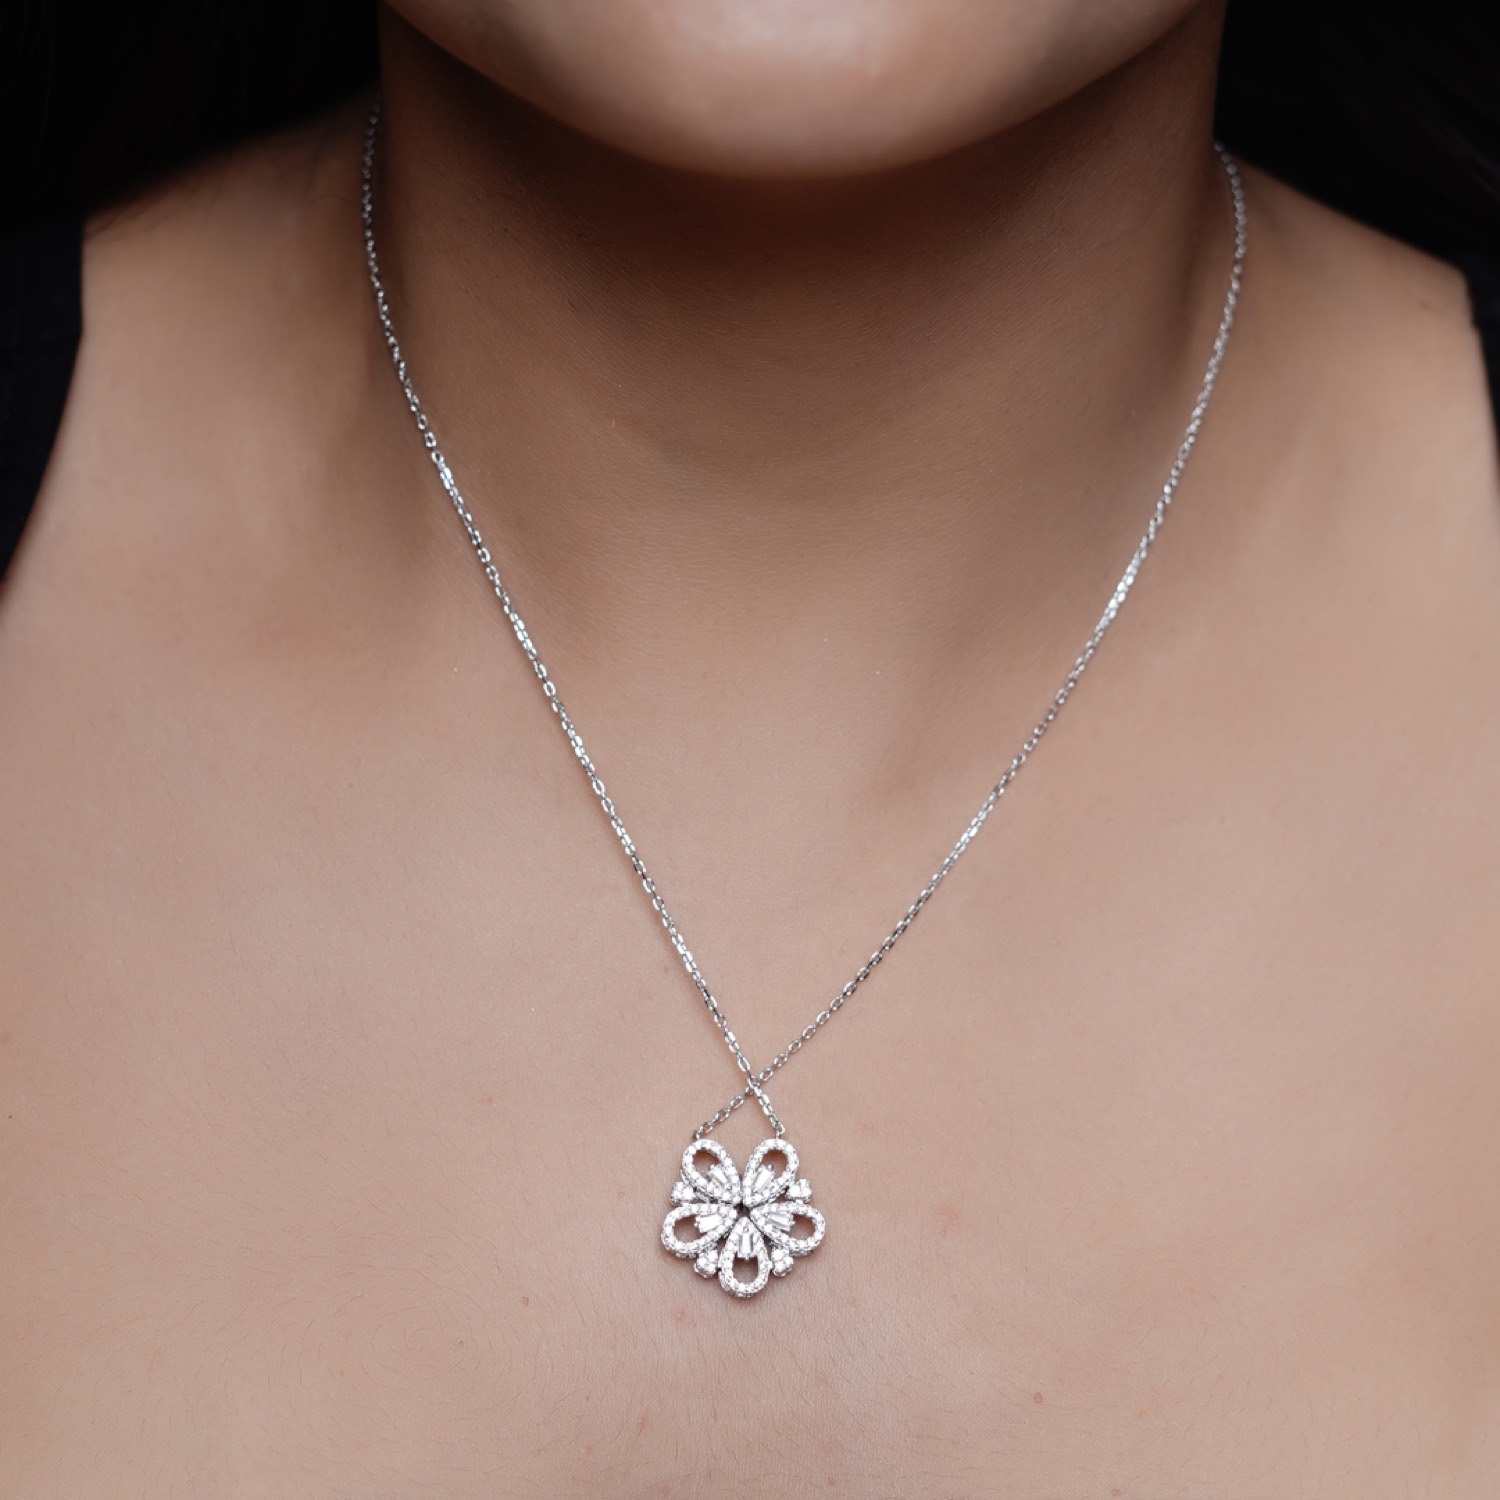 varam_chain_102022_flower_shaped_white_stone_pendant_with_silver_chain-2